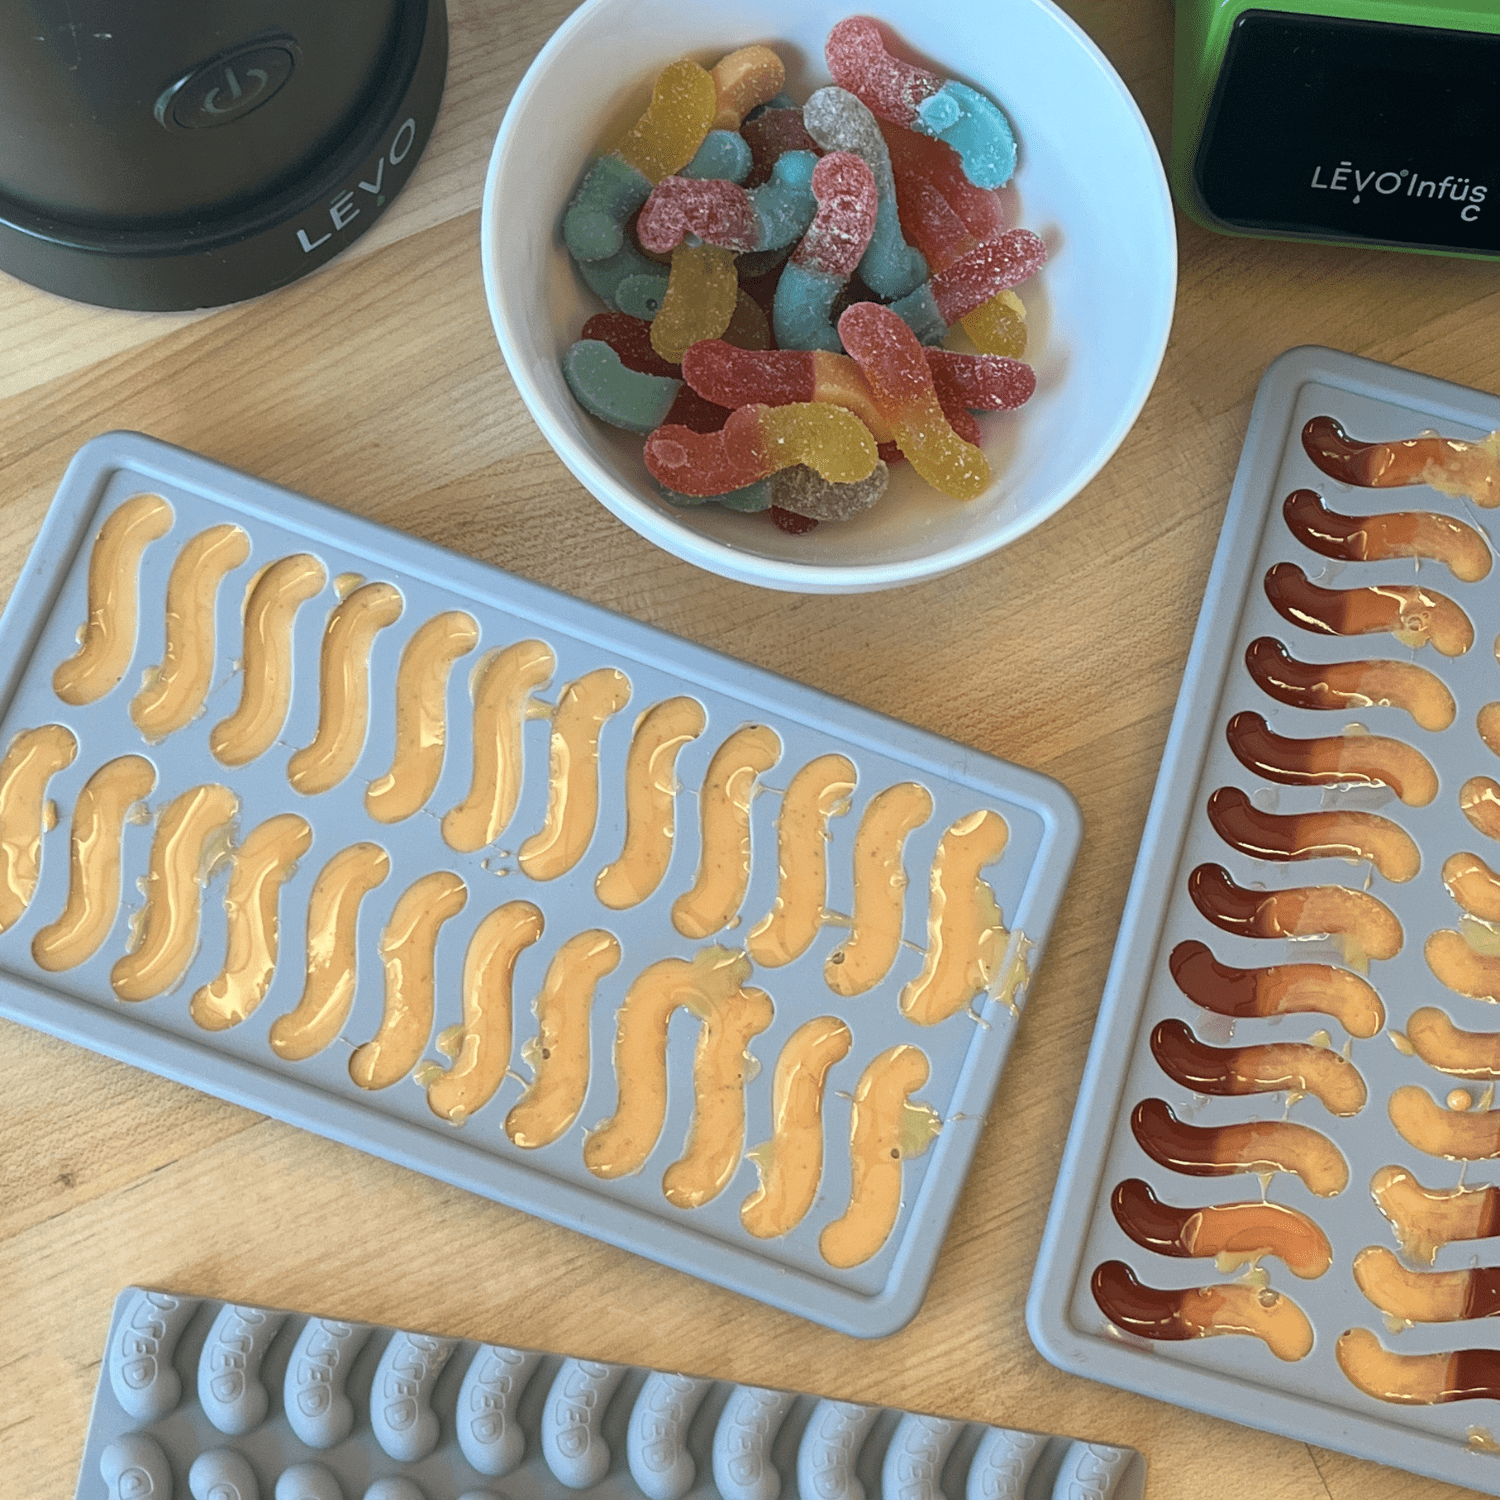 LEVO Gummy Worm Mold with two toned gummy mix and finished gummy worms in a bowl.